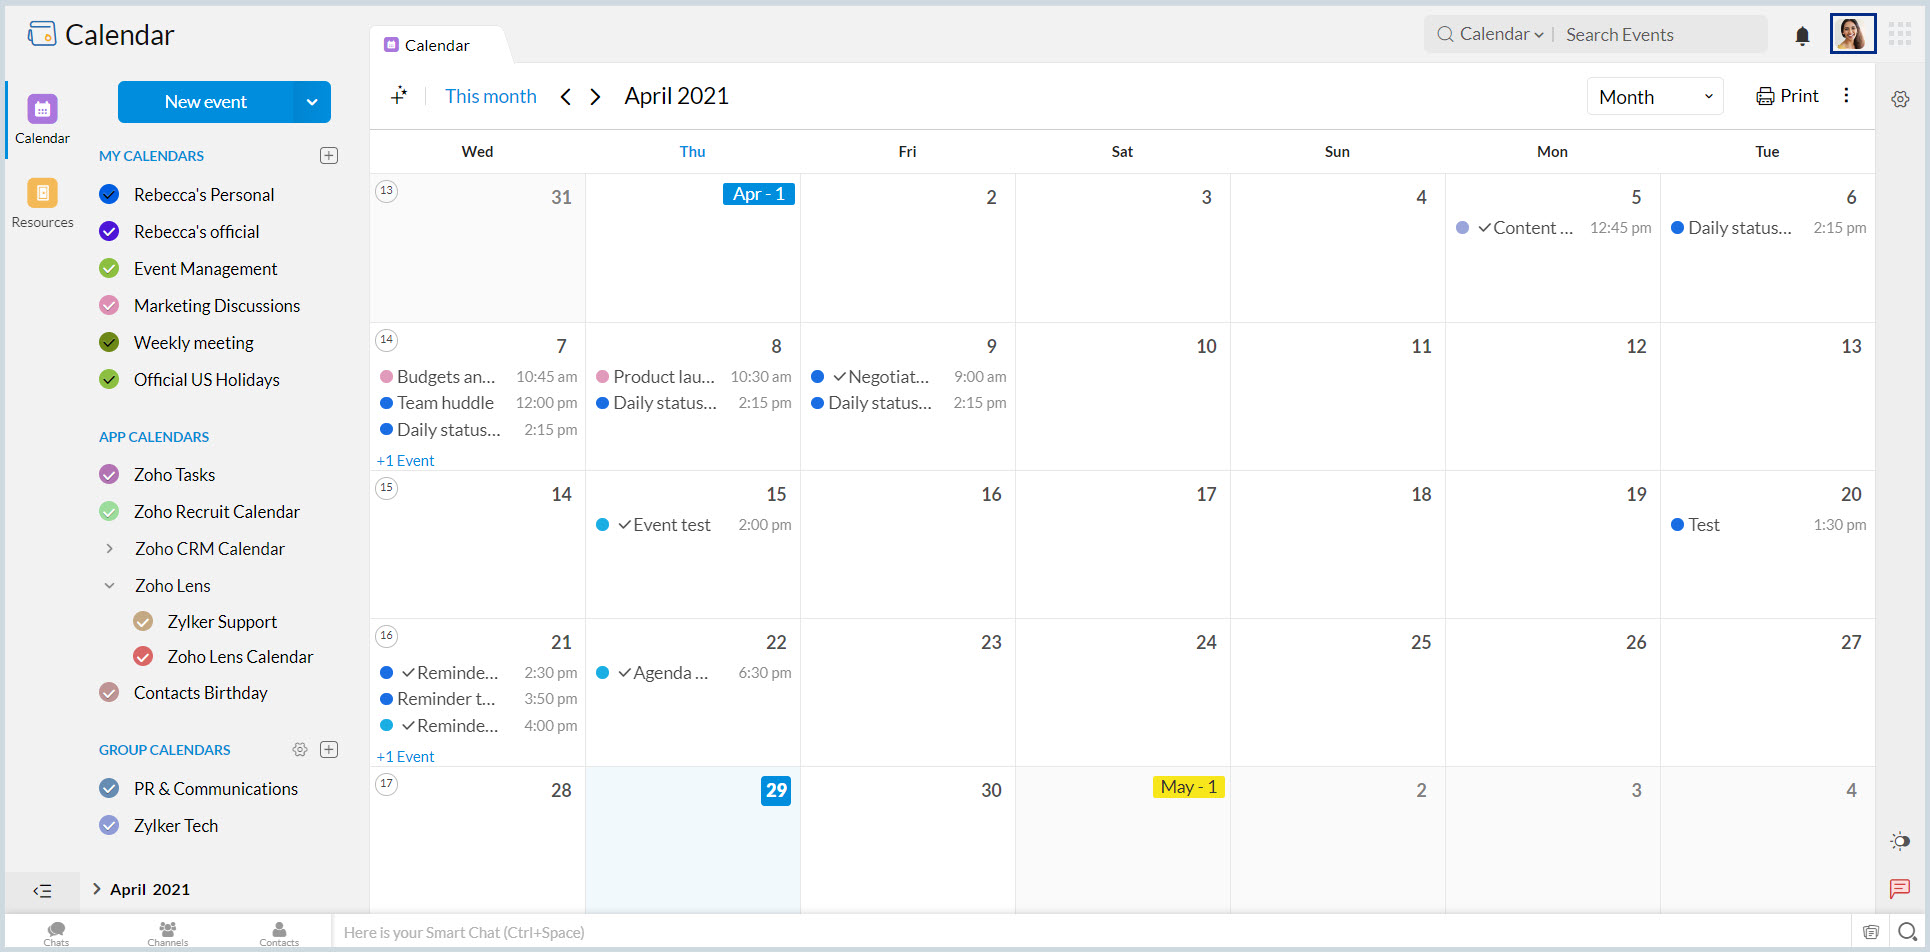 Troubleshooting Zoho Calendar and switching to old UI